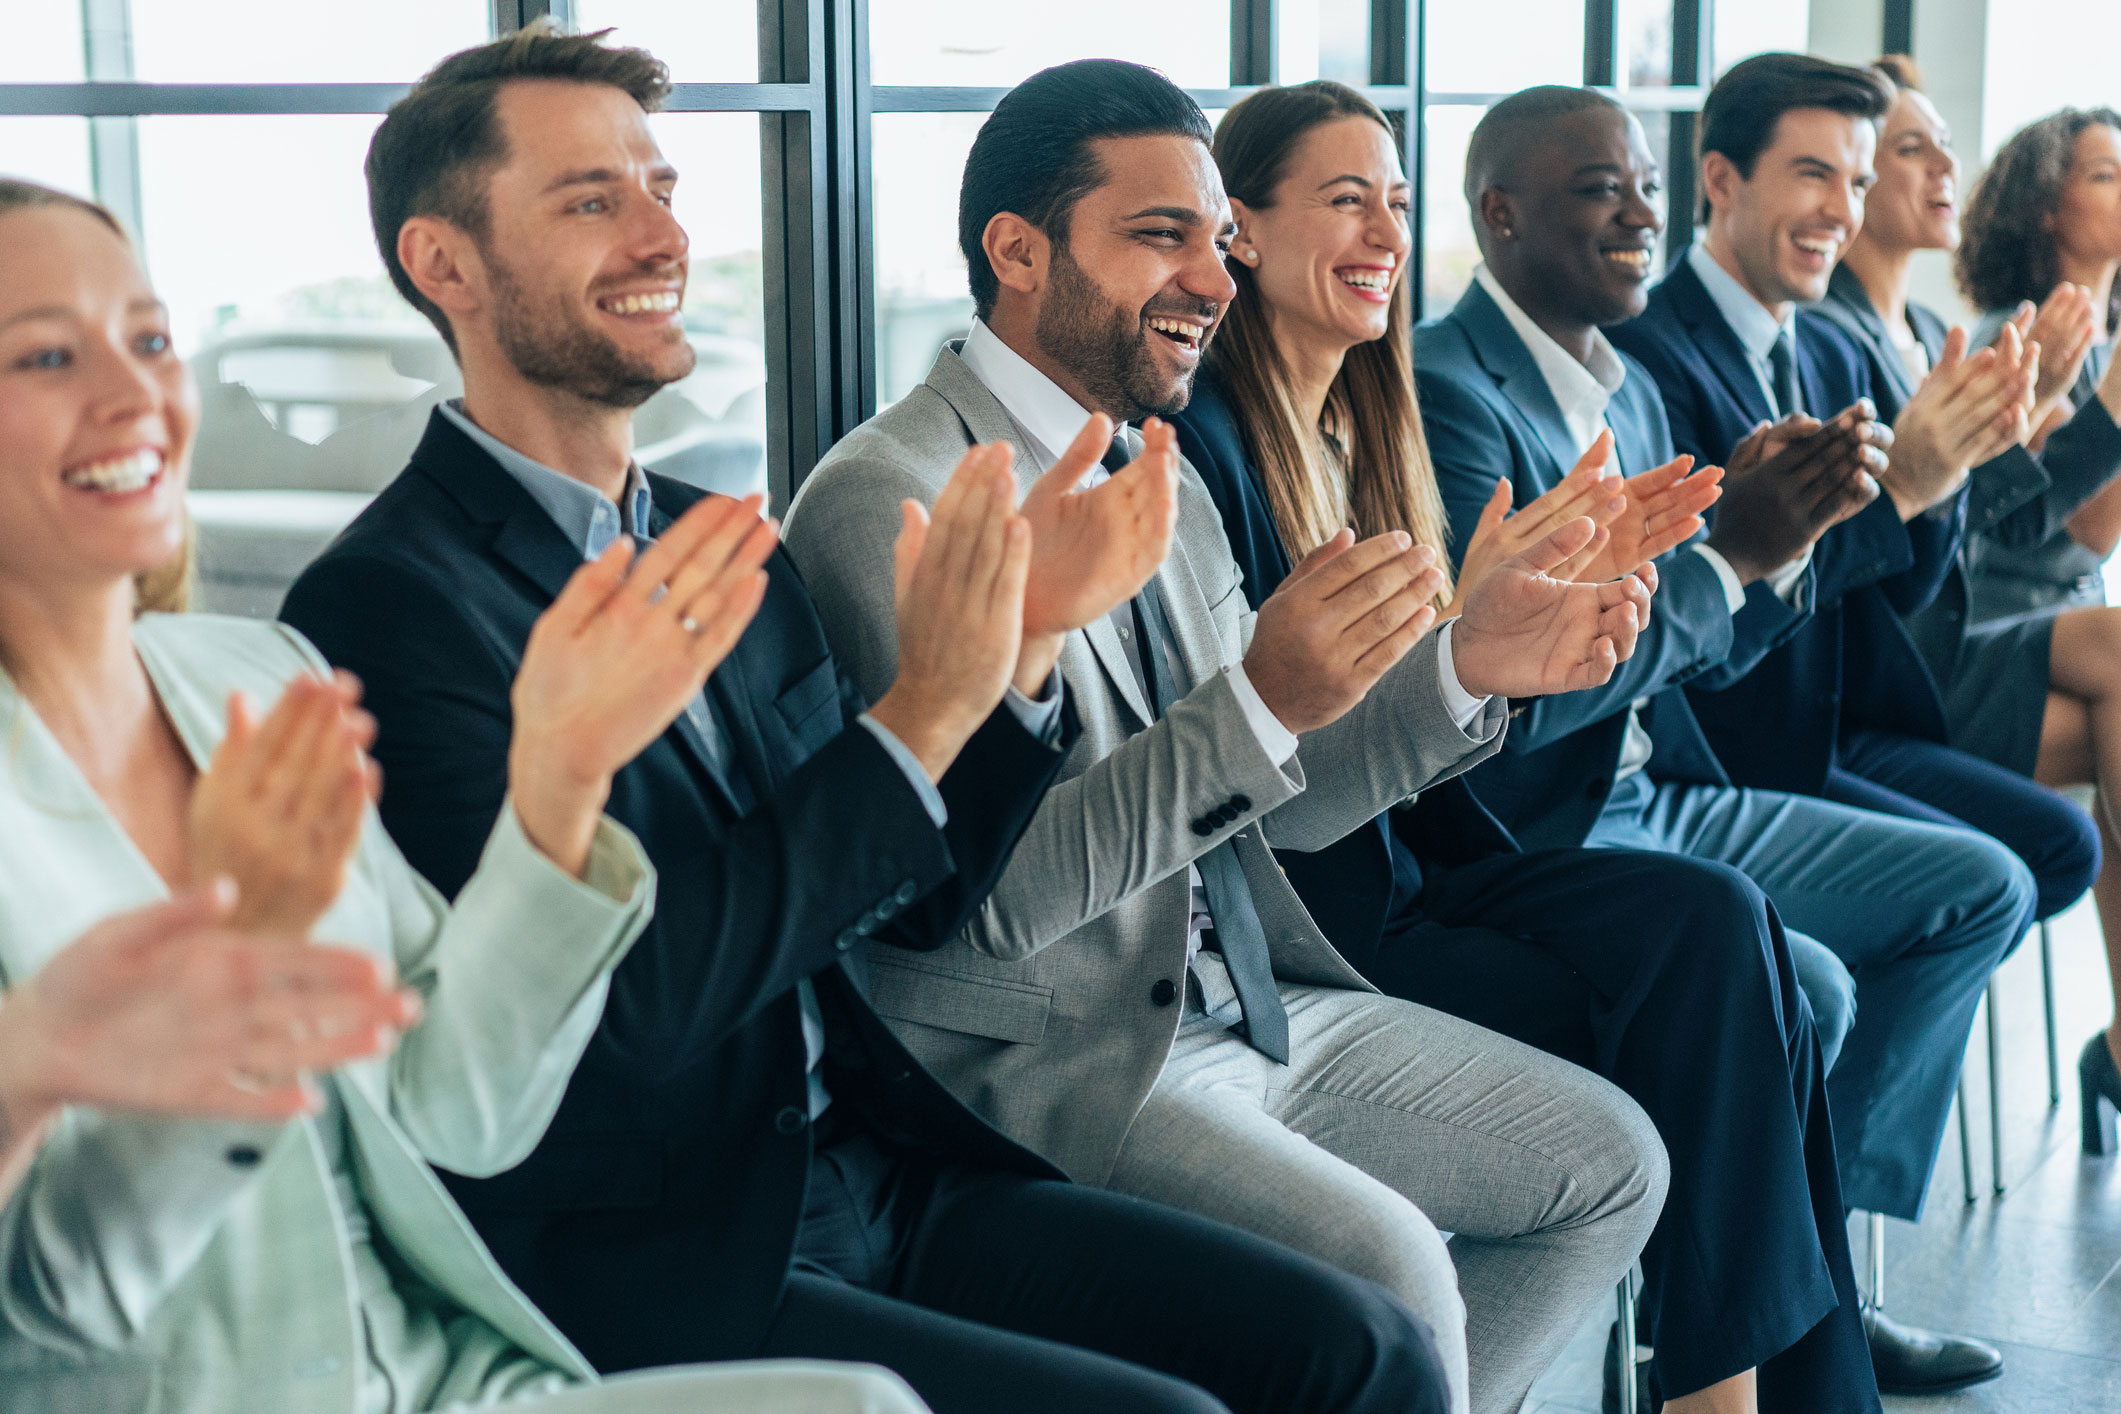 business professionals clapping at an event